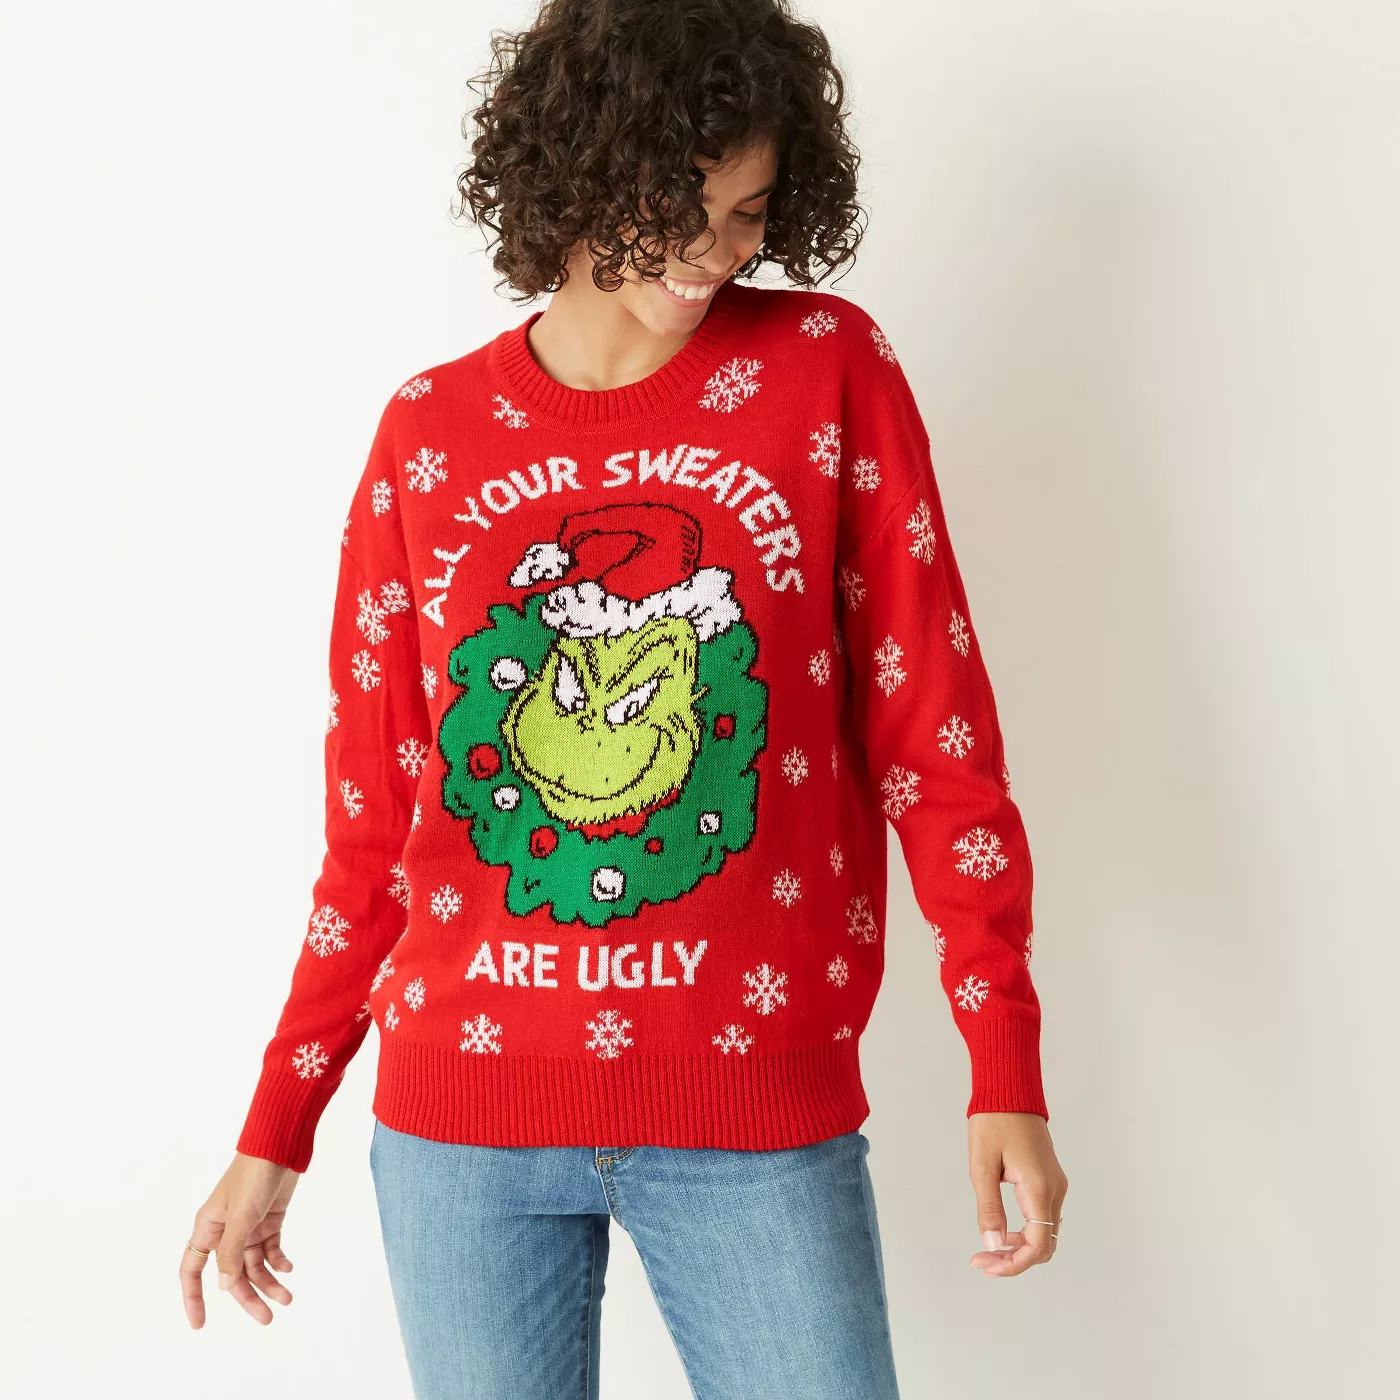 Women's The Grinch All Your Sweaters are Ugly Pullover Sweater - Red - image 1 of 3